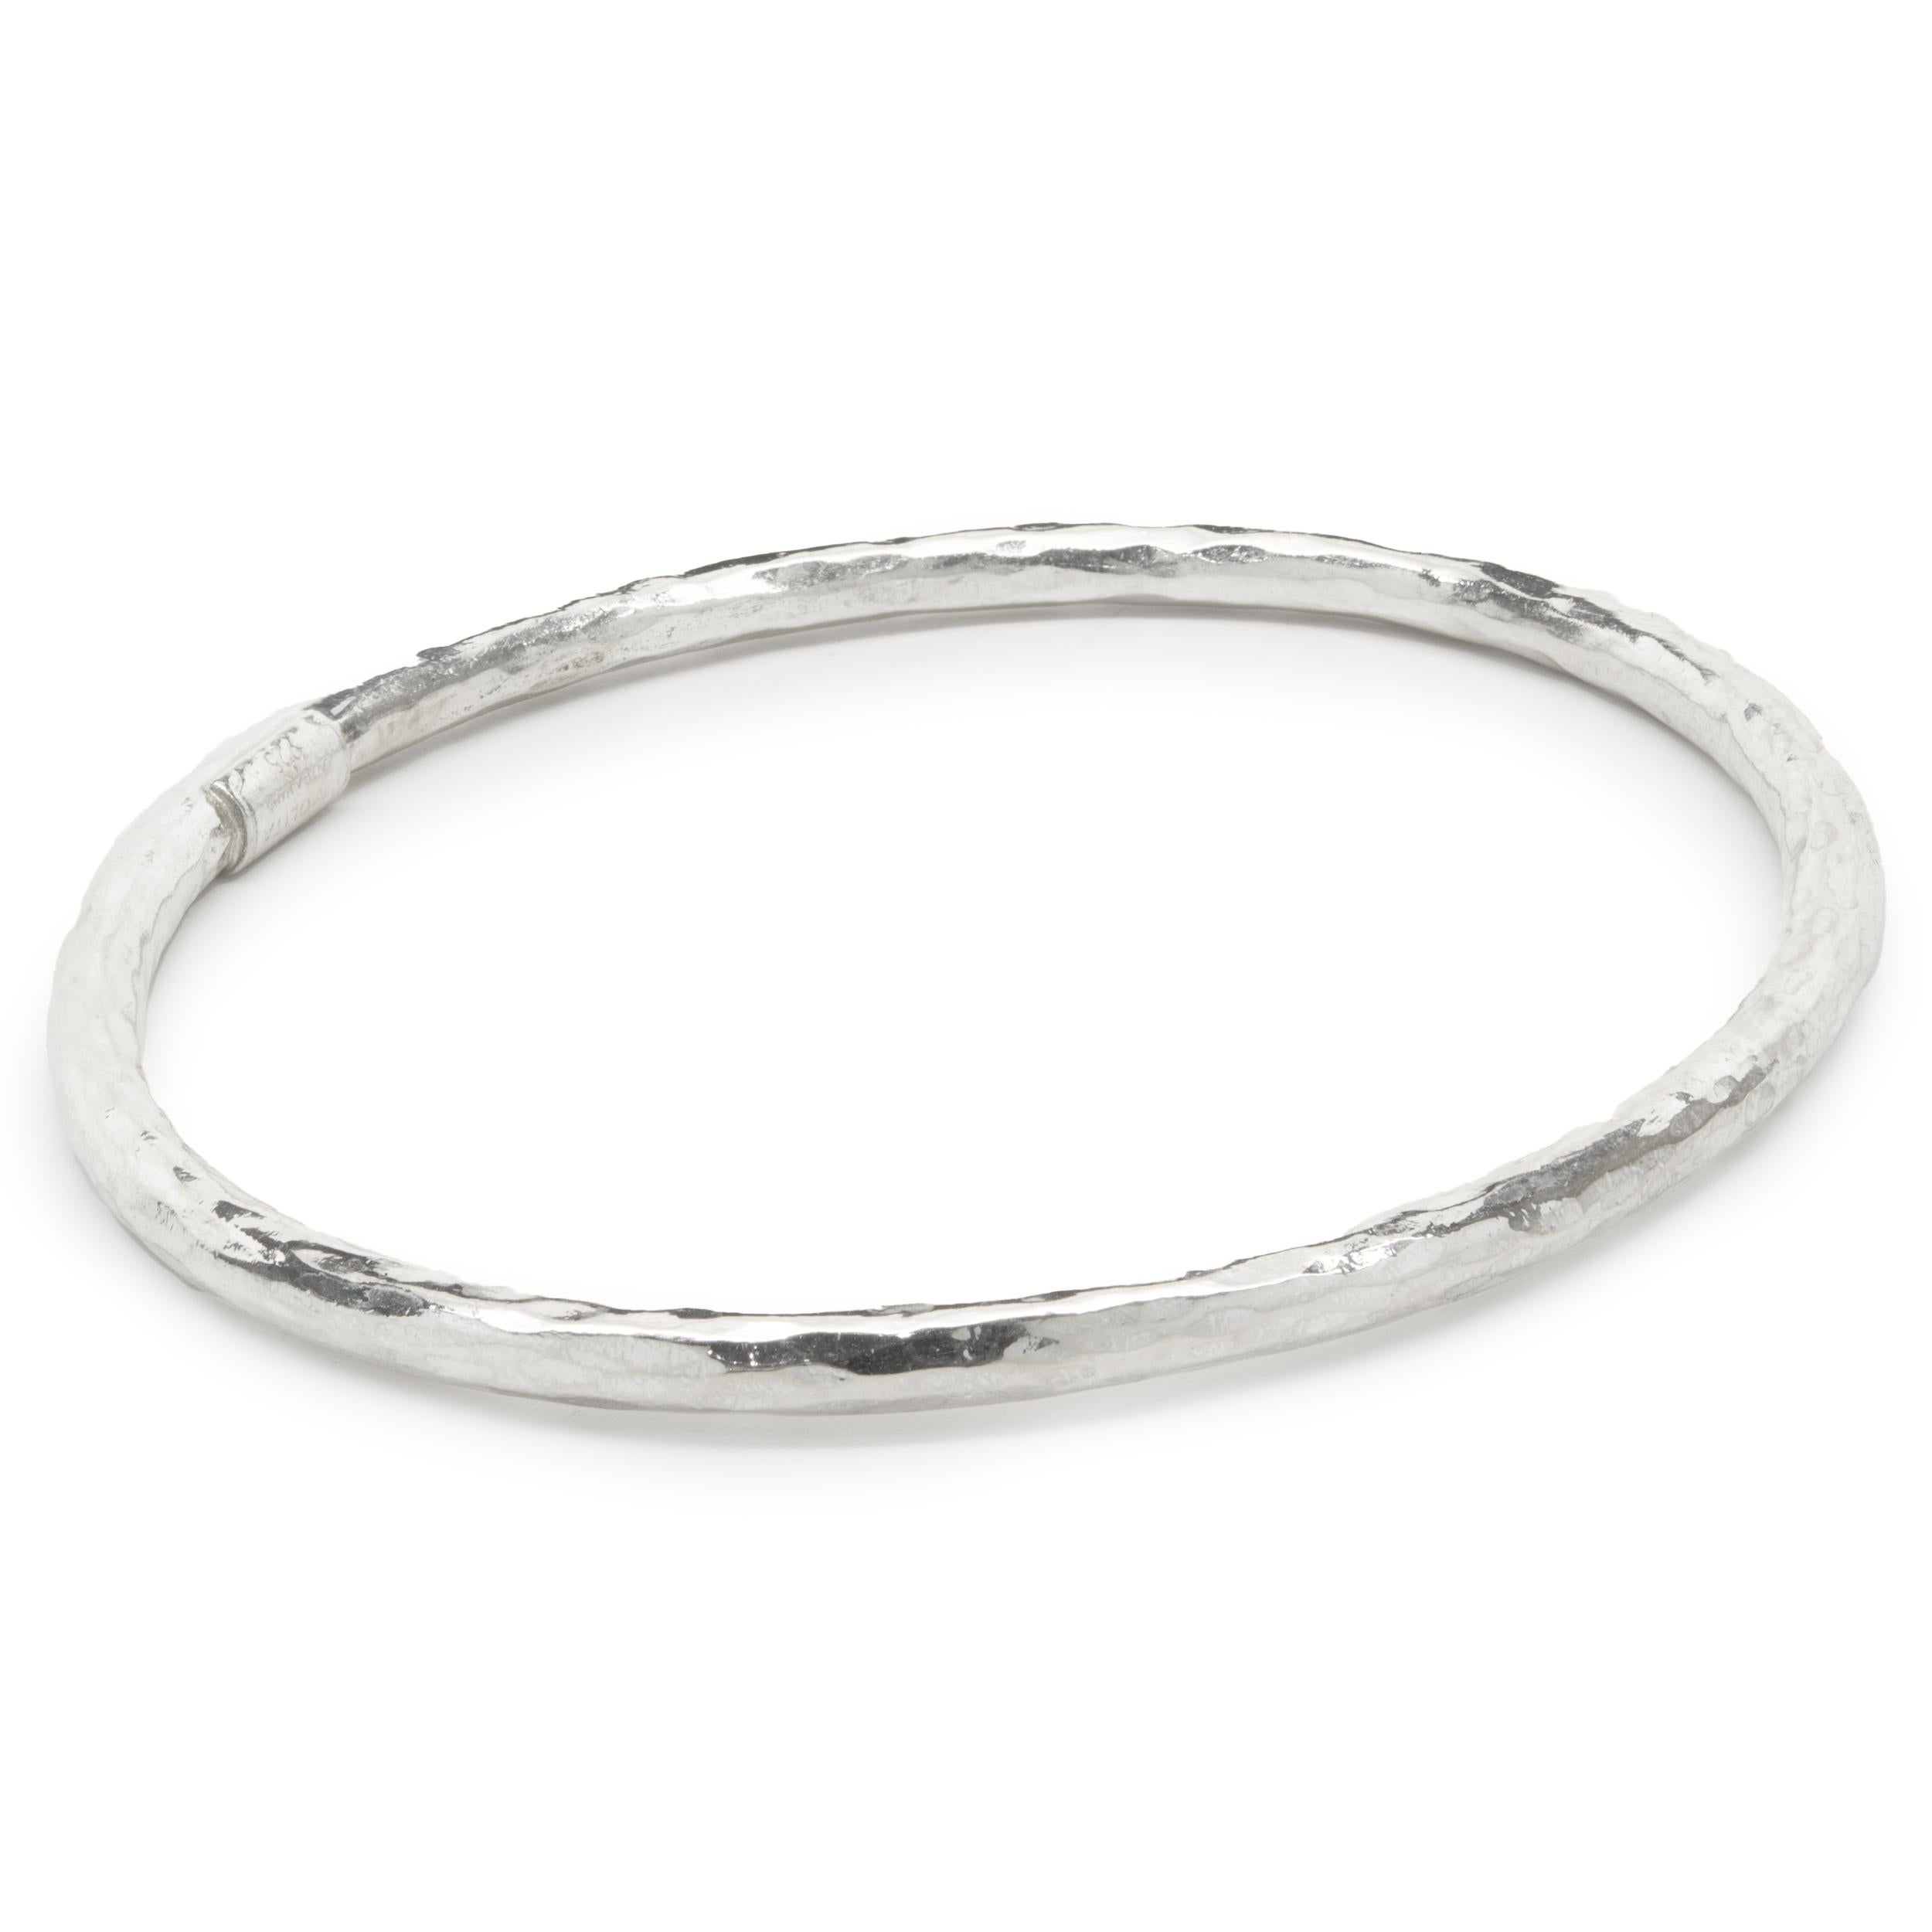 Designer: Ippolita
Material: sterling silver
Weight: 21.81 grams
Dimensions: bracelet will fit up to a 7-inch wrist